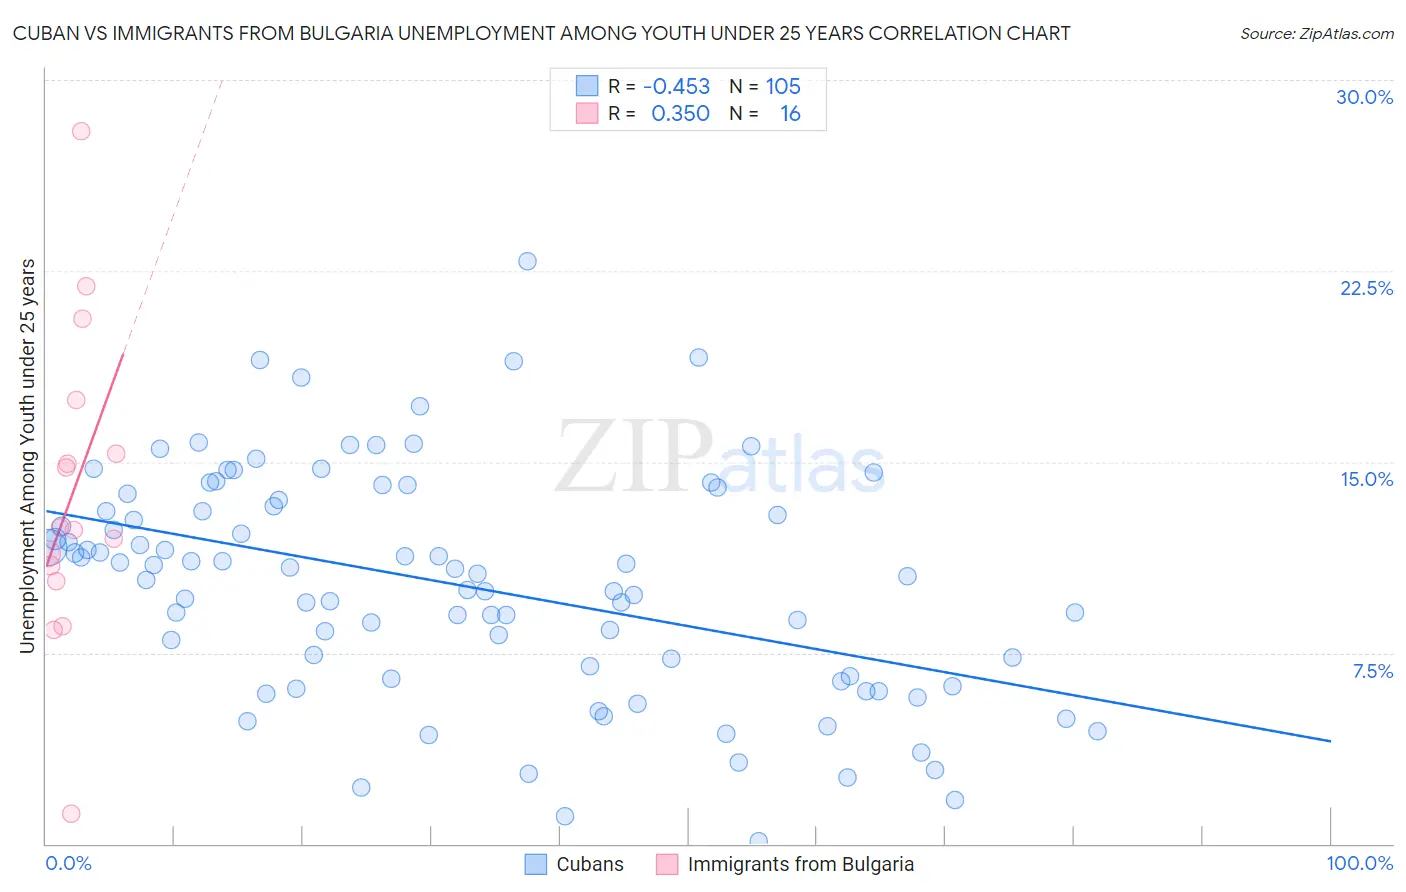 Cuban vs Immigrants from Bulgaria Unemployment Among Youth under 25 years